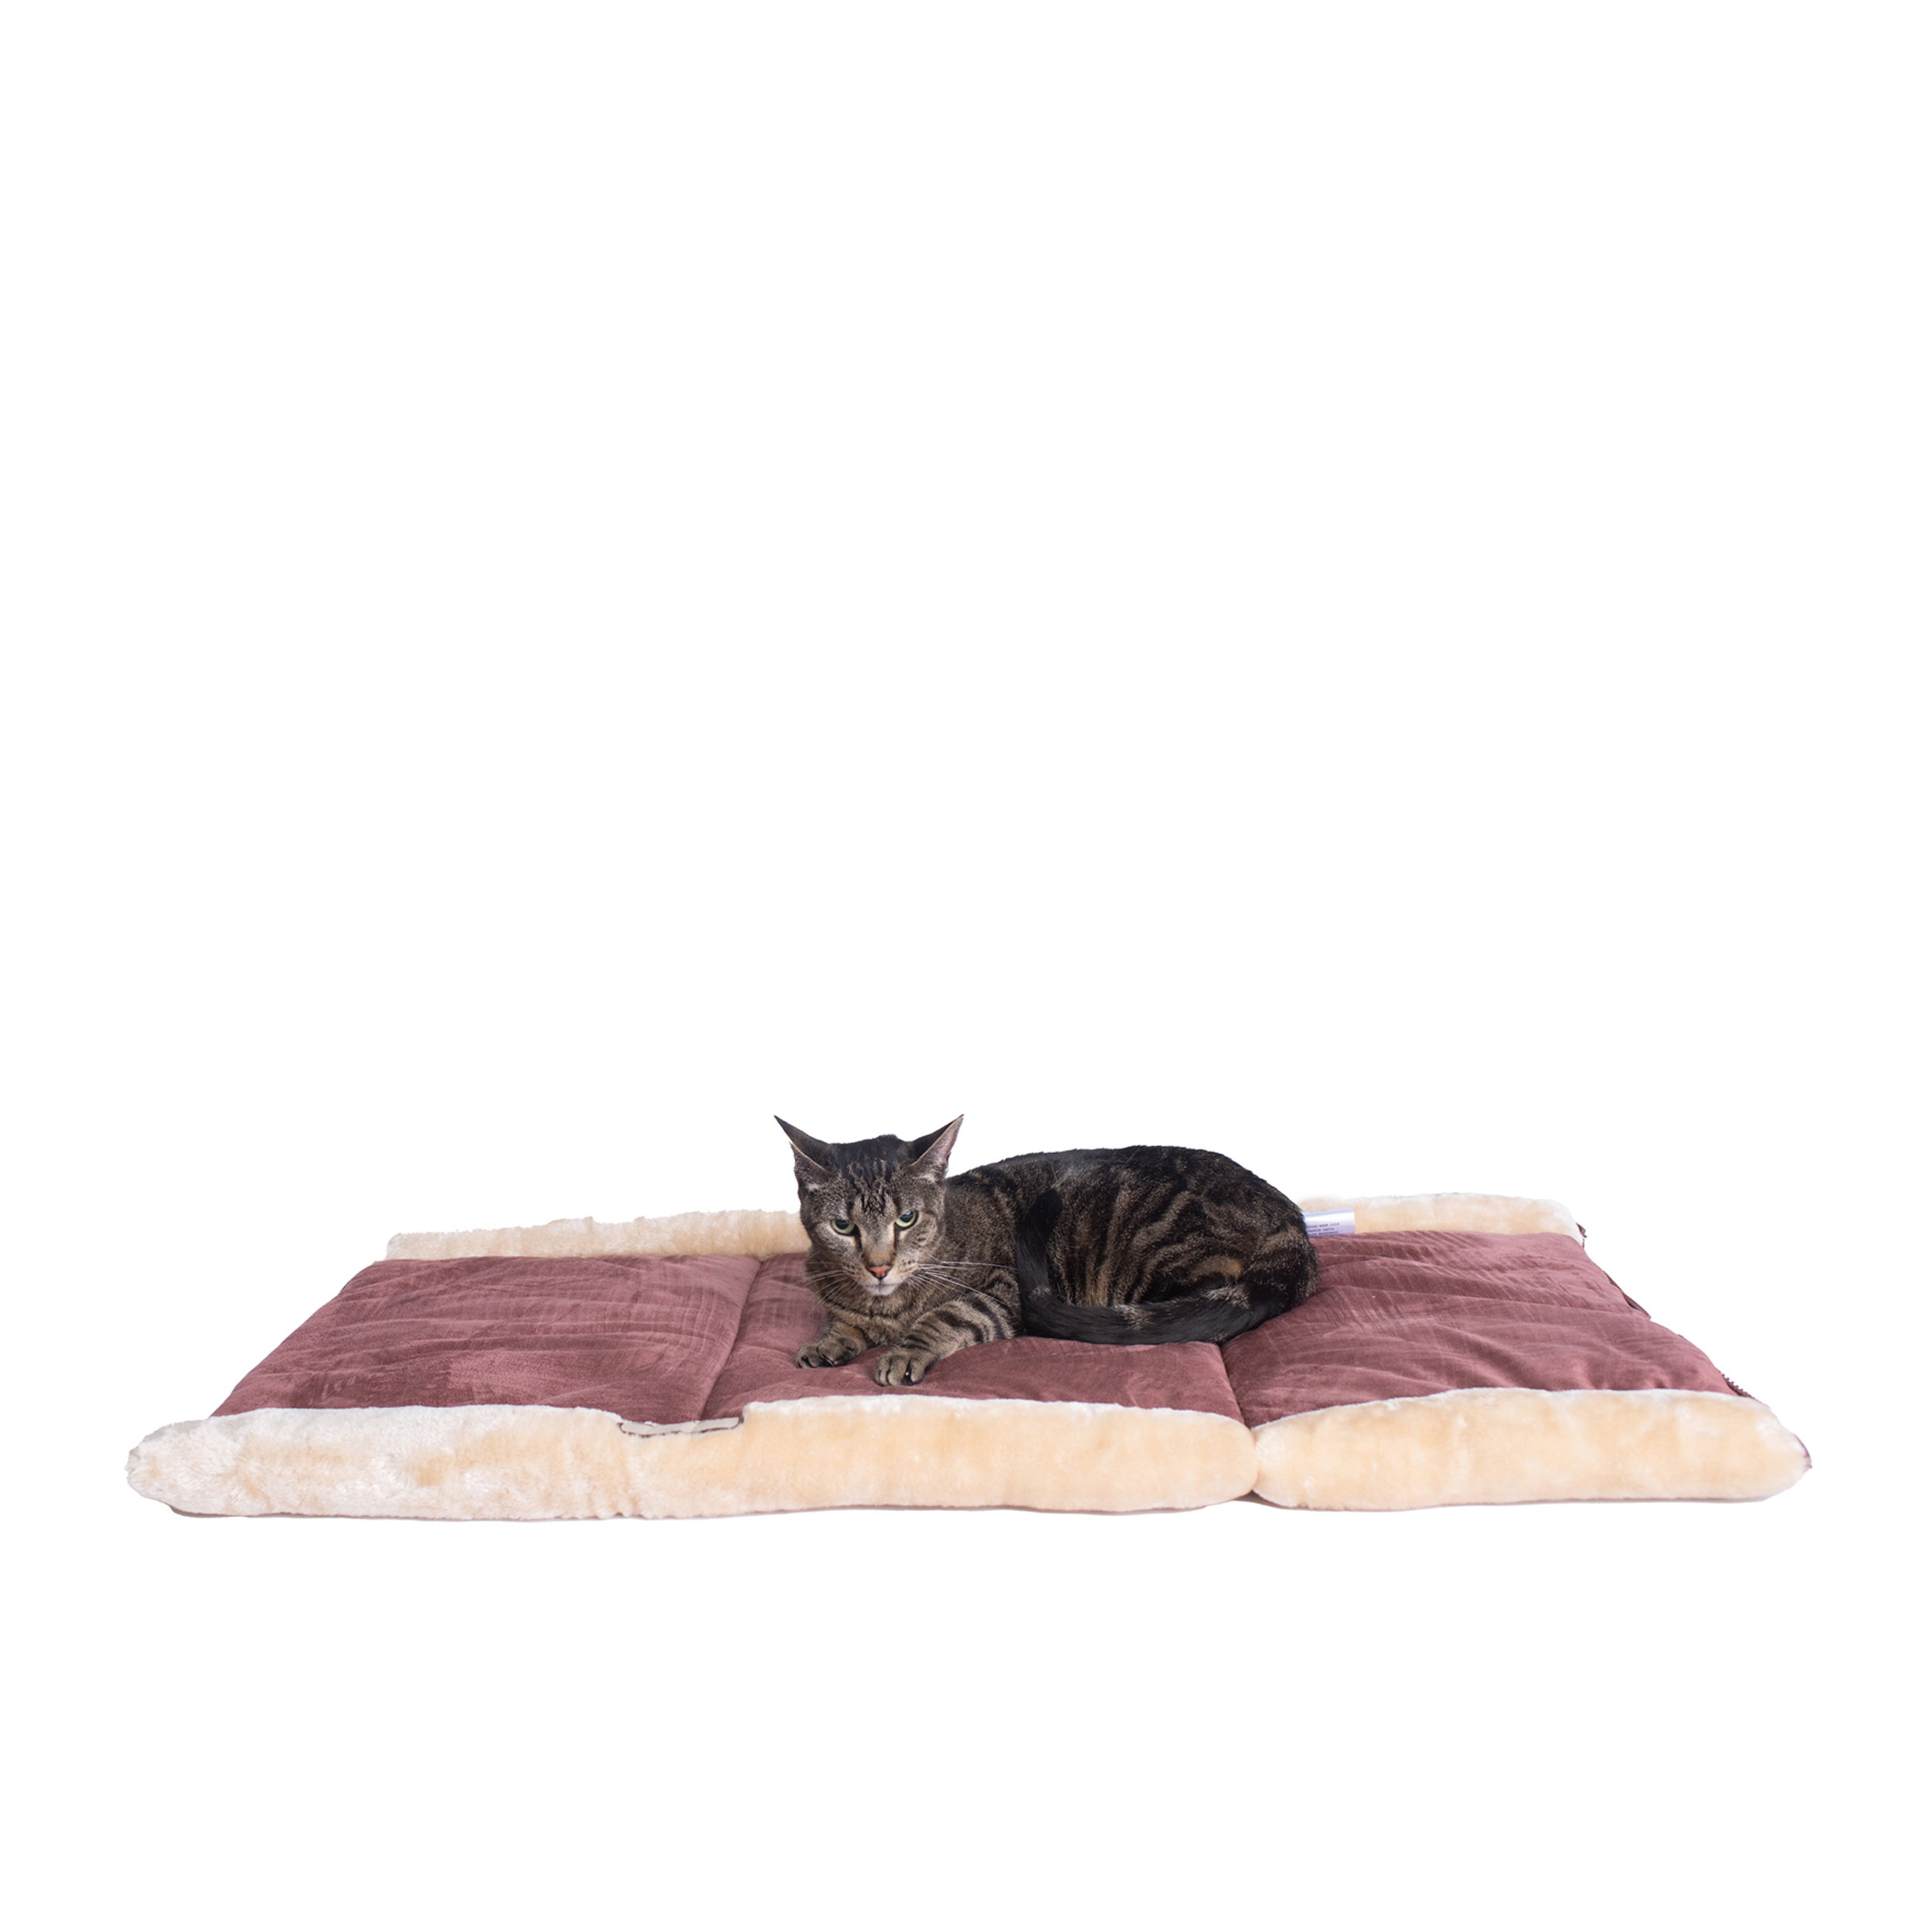 Armarkat Multiple use Cat Bed Pad, 22-Inch by 14-Inch by 10-Inch or 38-Inch by 22-Inch, C16HTH/MH - image 2 of 6